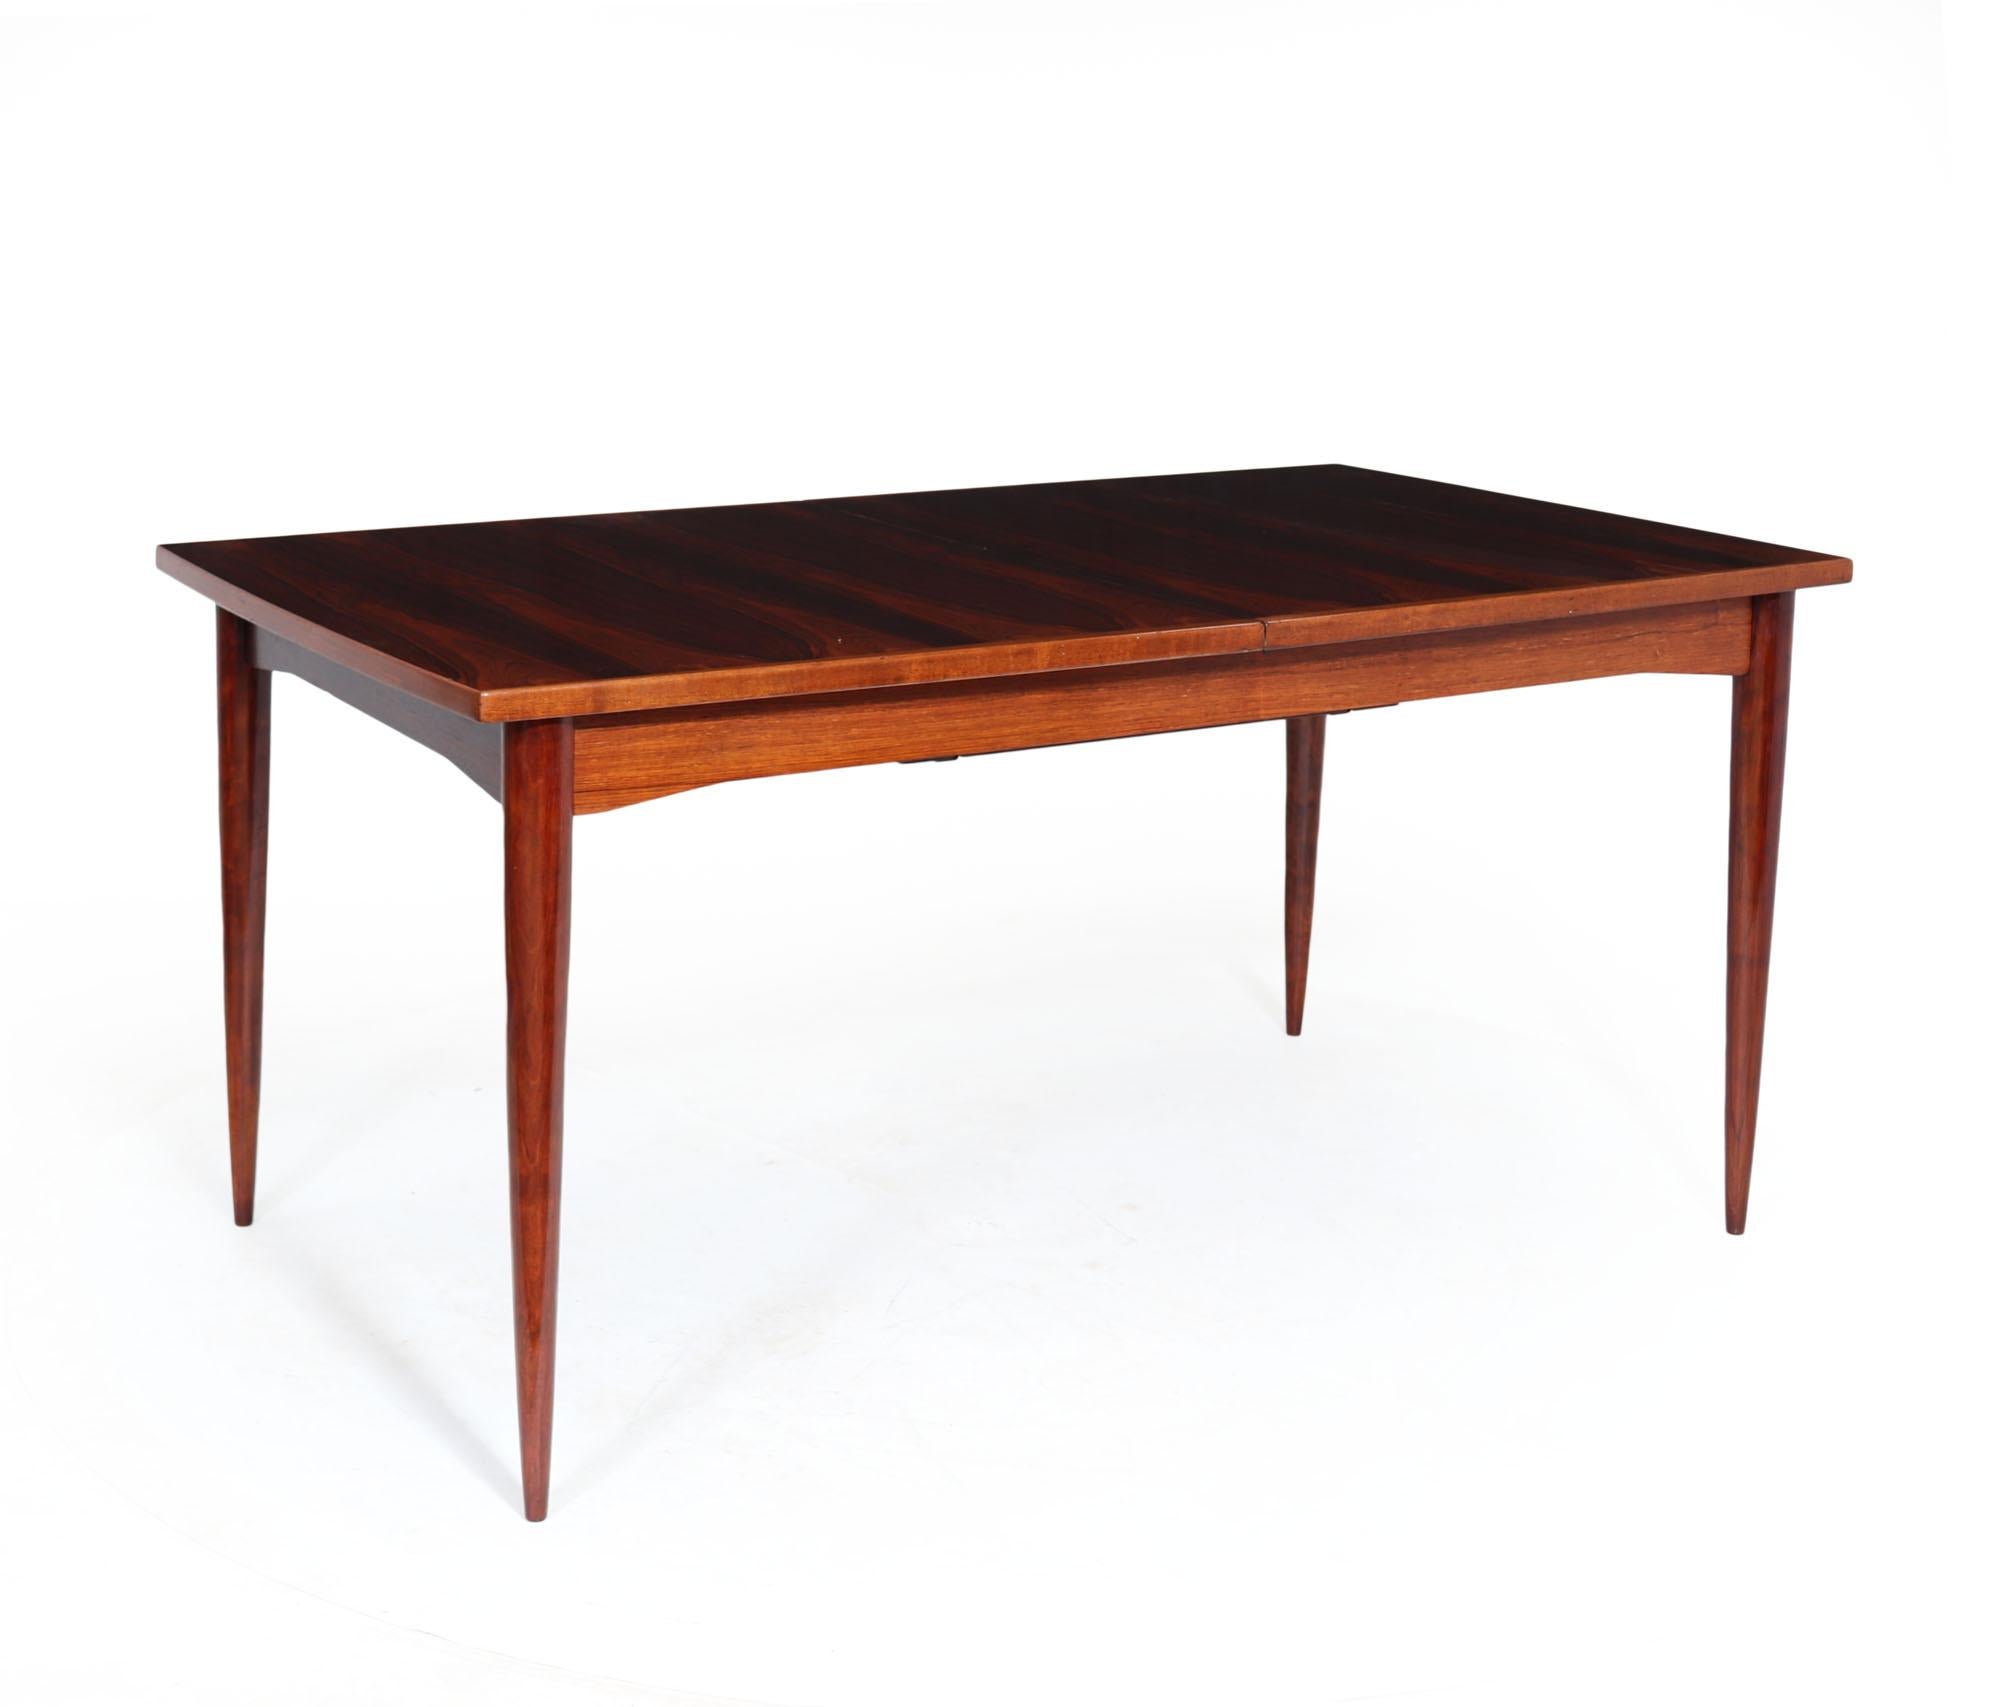 MID CENTURY EXTENDING TABLE
A French Mid-Century Modern extending dining table with hidden ‘Butterfly leaf’ the table will comfortably seat six when closed. The table has been restored where necessary and fully professionally polished by hand and